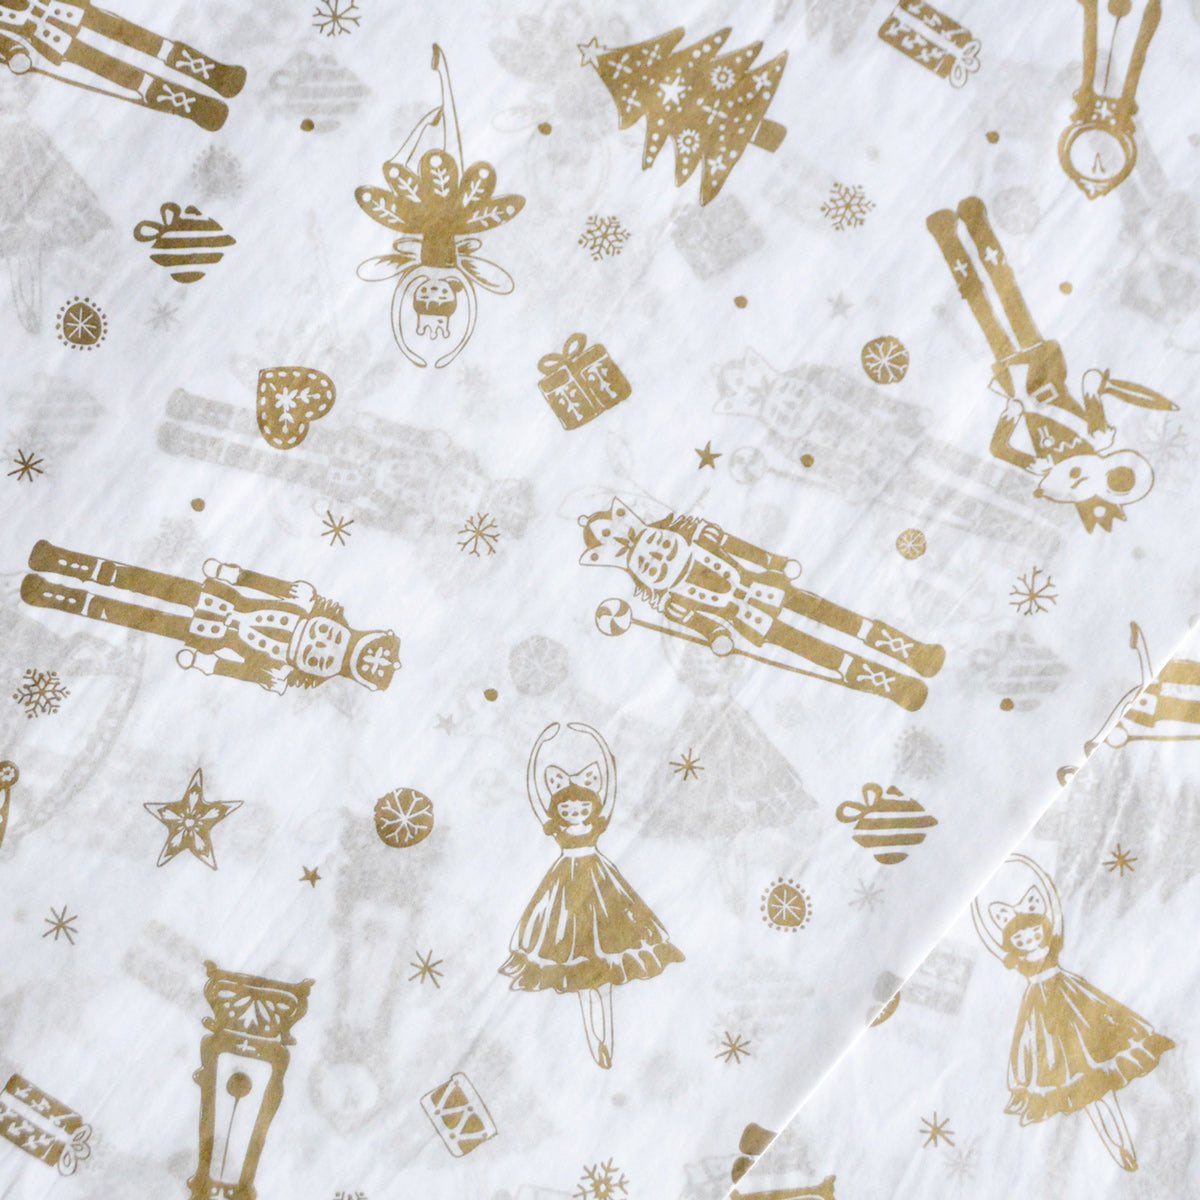 Golden Nutcrackers and Ballet Dancers Tissue Paper - Modern Winter Holiday Gift Wrapping & DIY Projects Supplies